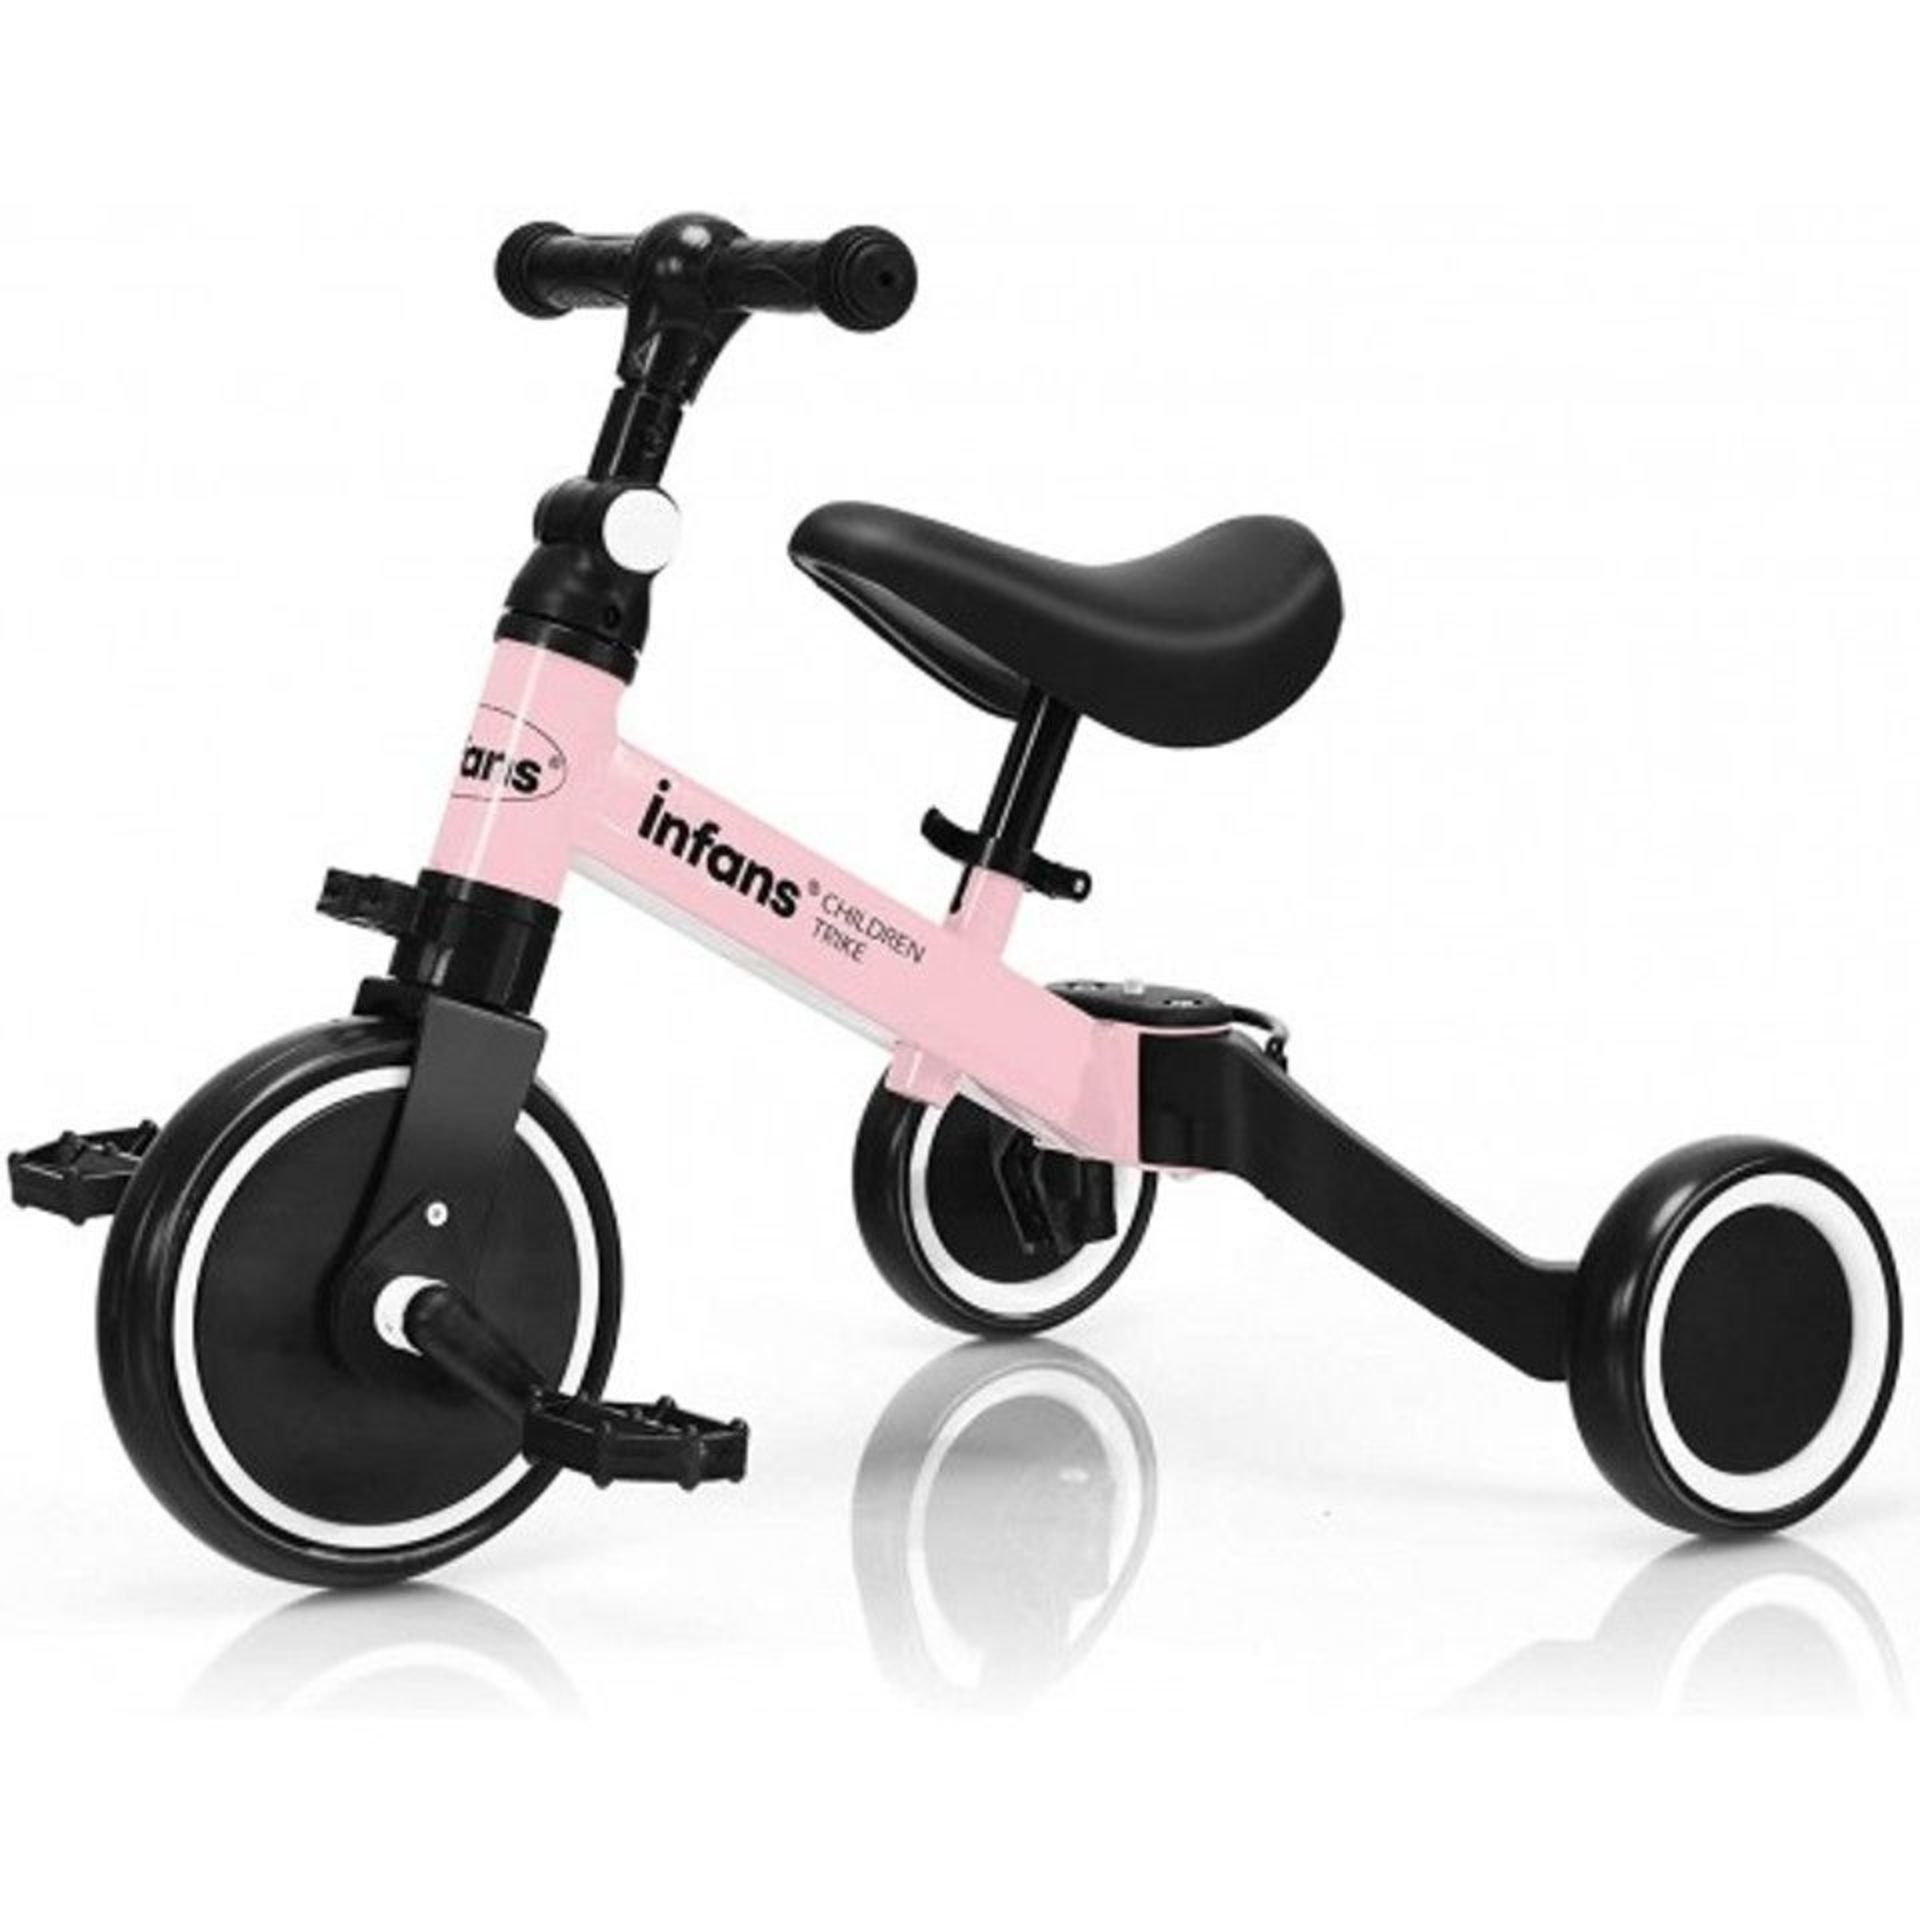 3 In 1 3 Wheel Kids Tricycles With Adjustable Seat And Handlebar Pink. - ER26